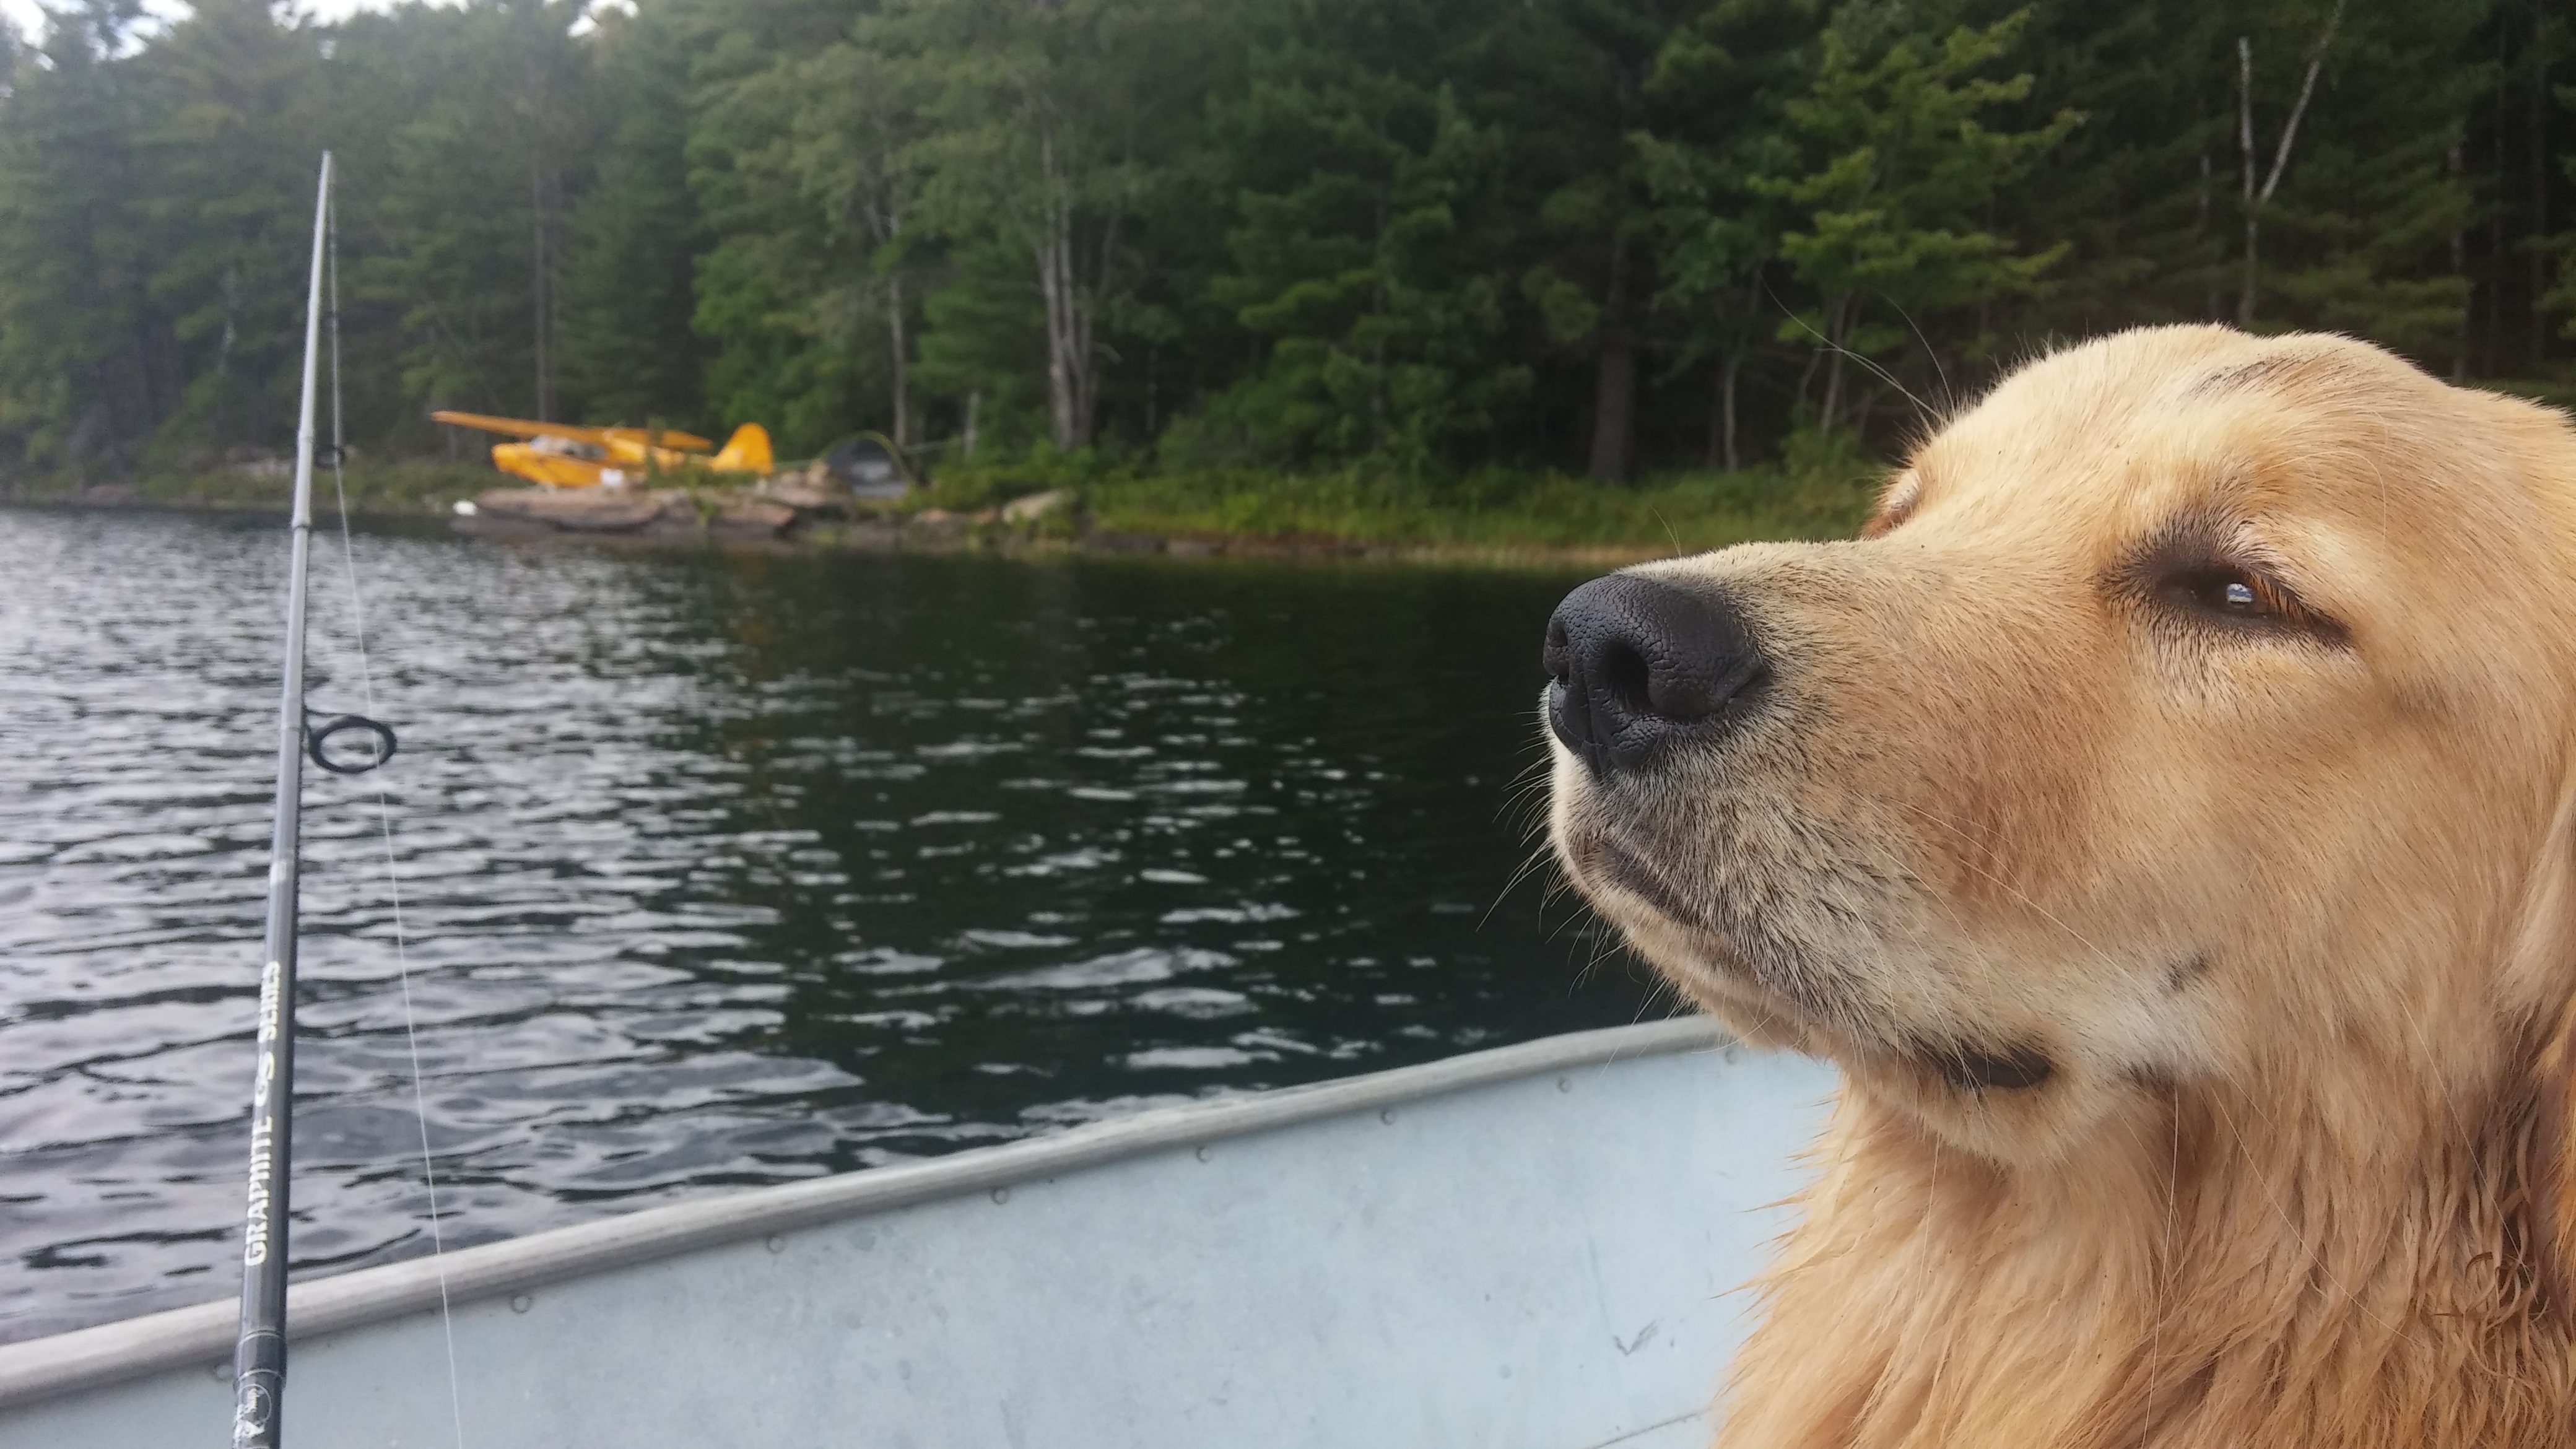 Golden retriever riding in boat on camping trip